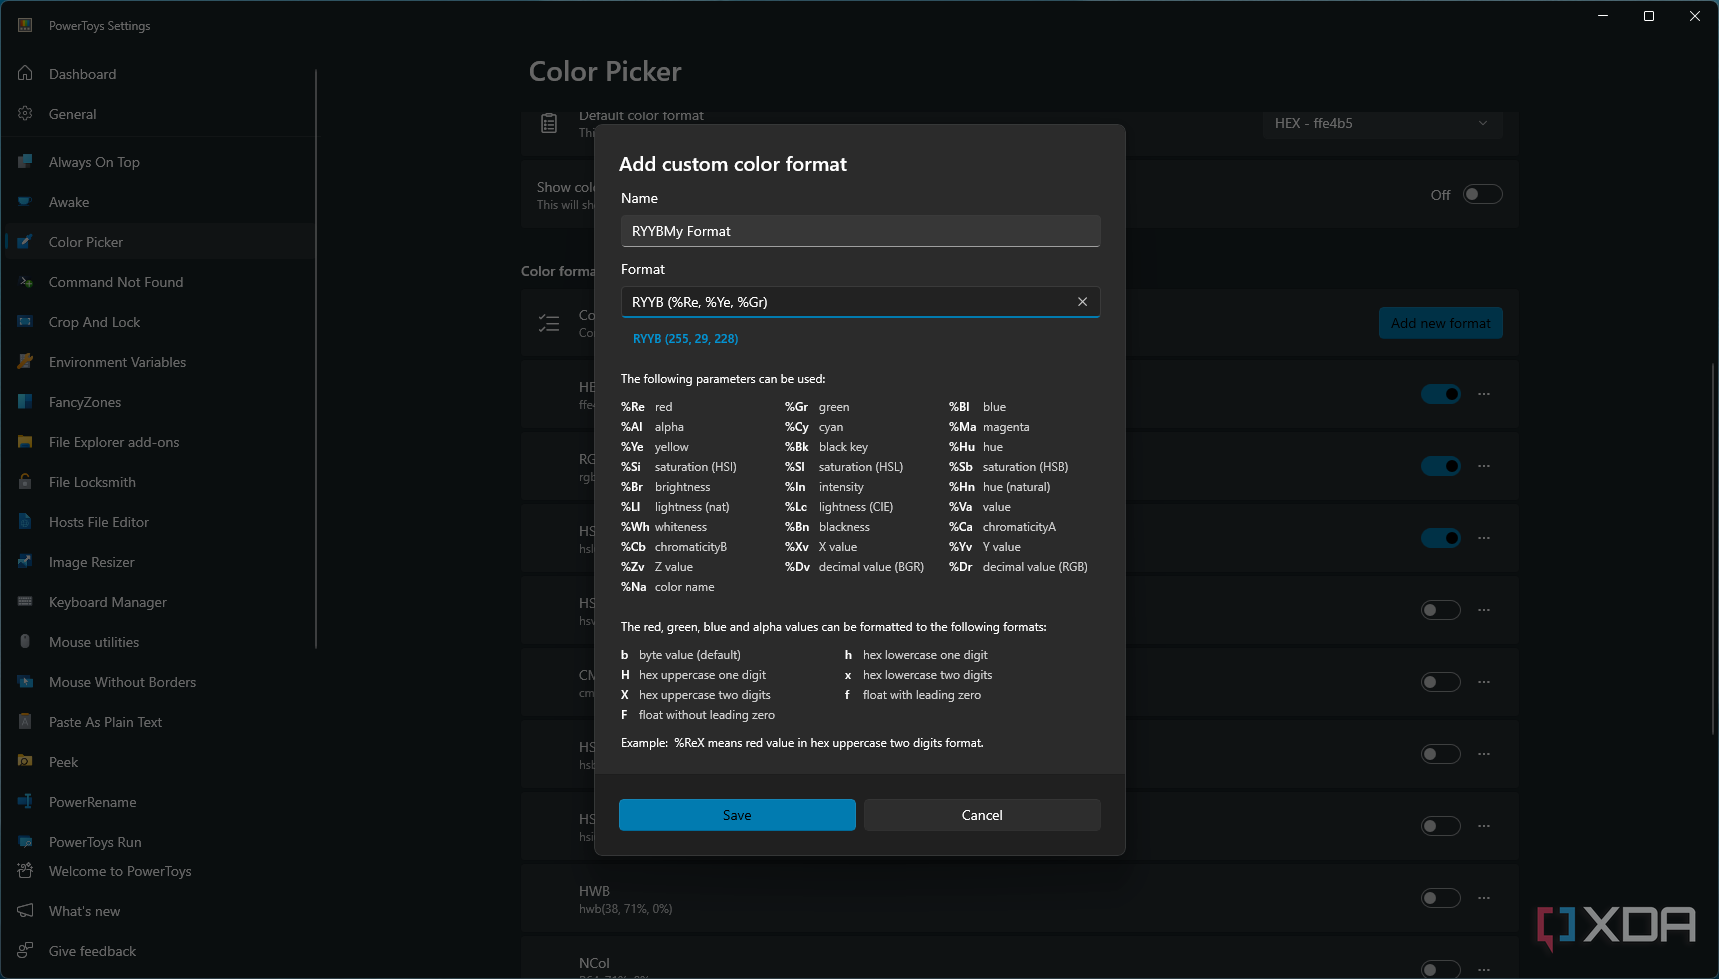 Screenshot of the customization options when adding a new color format to color picker in PowerToys